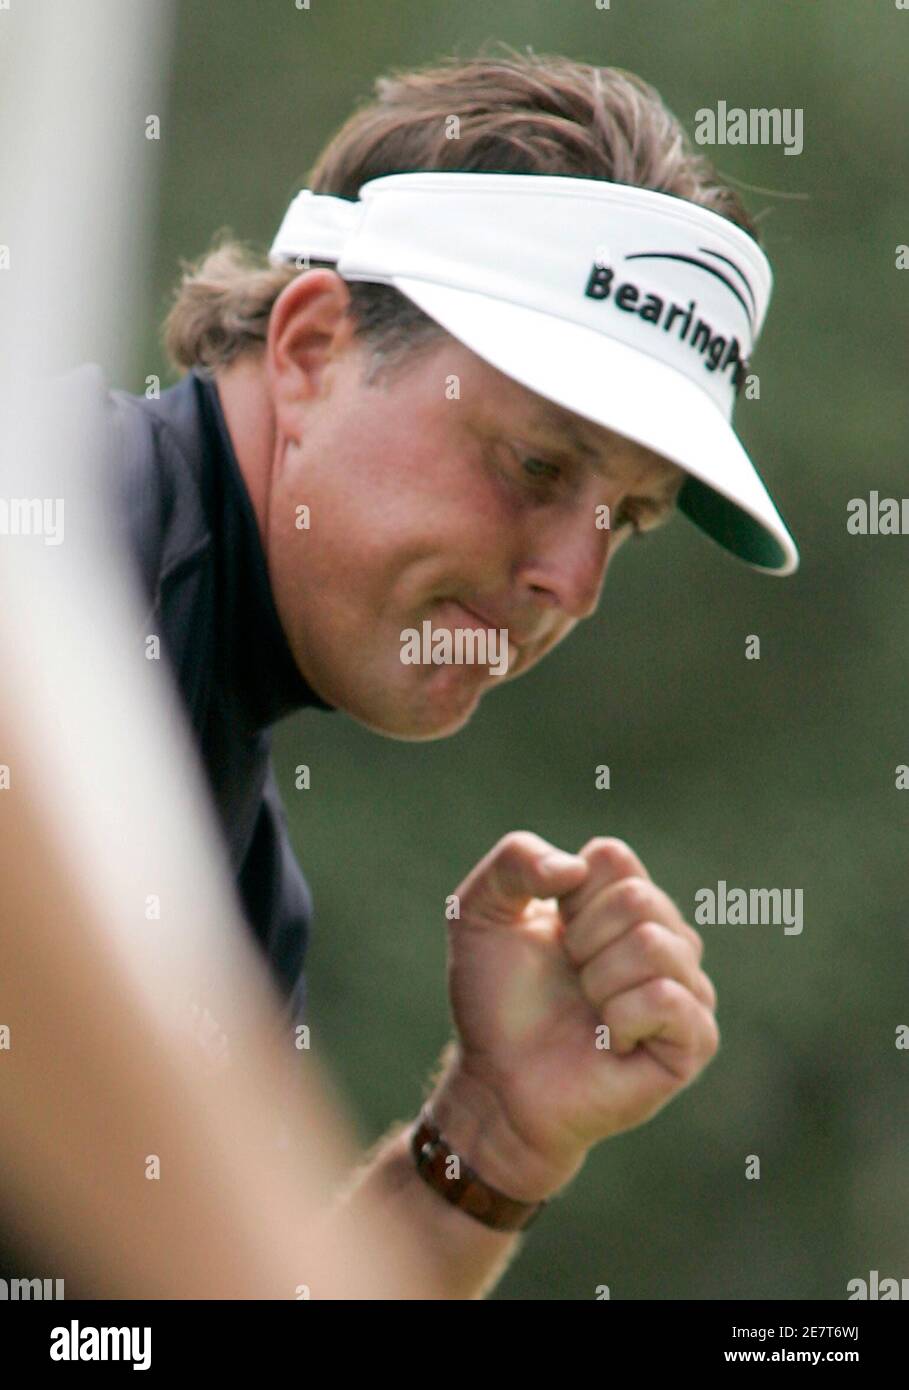 Phil Mickelson reacts after making a birdie putt on the first hole during the final round of play at The Players Championship golf tournament in Ponte Vedra Beach, Florida May 13, 2007. REUTERS/Rick Fowler (UNITED STATES) Stock Photo